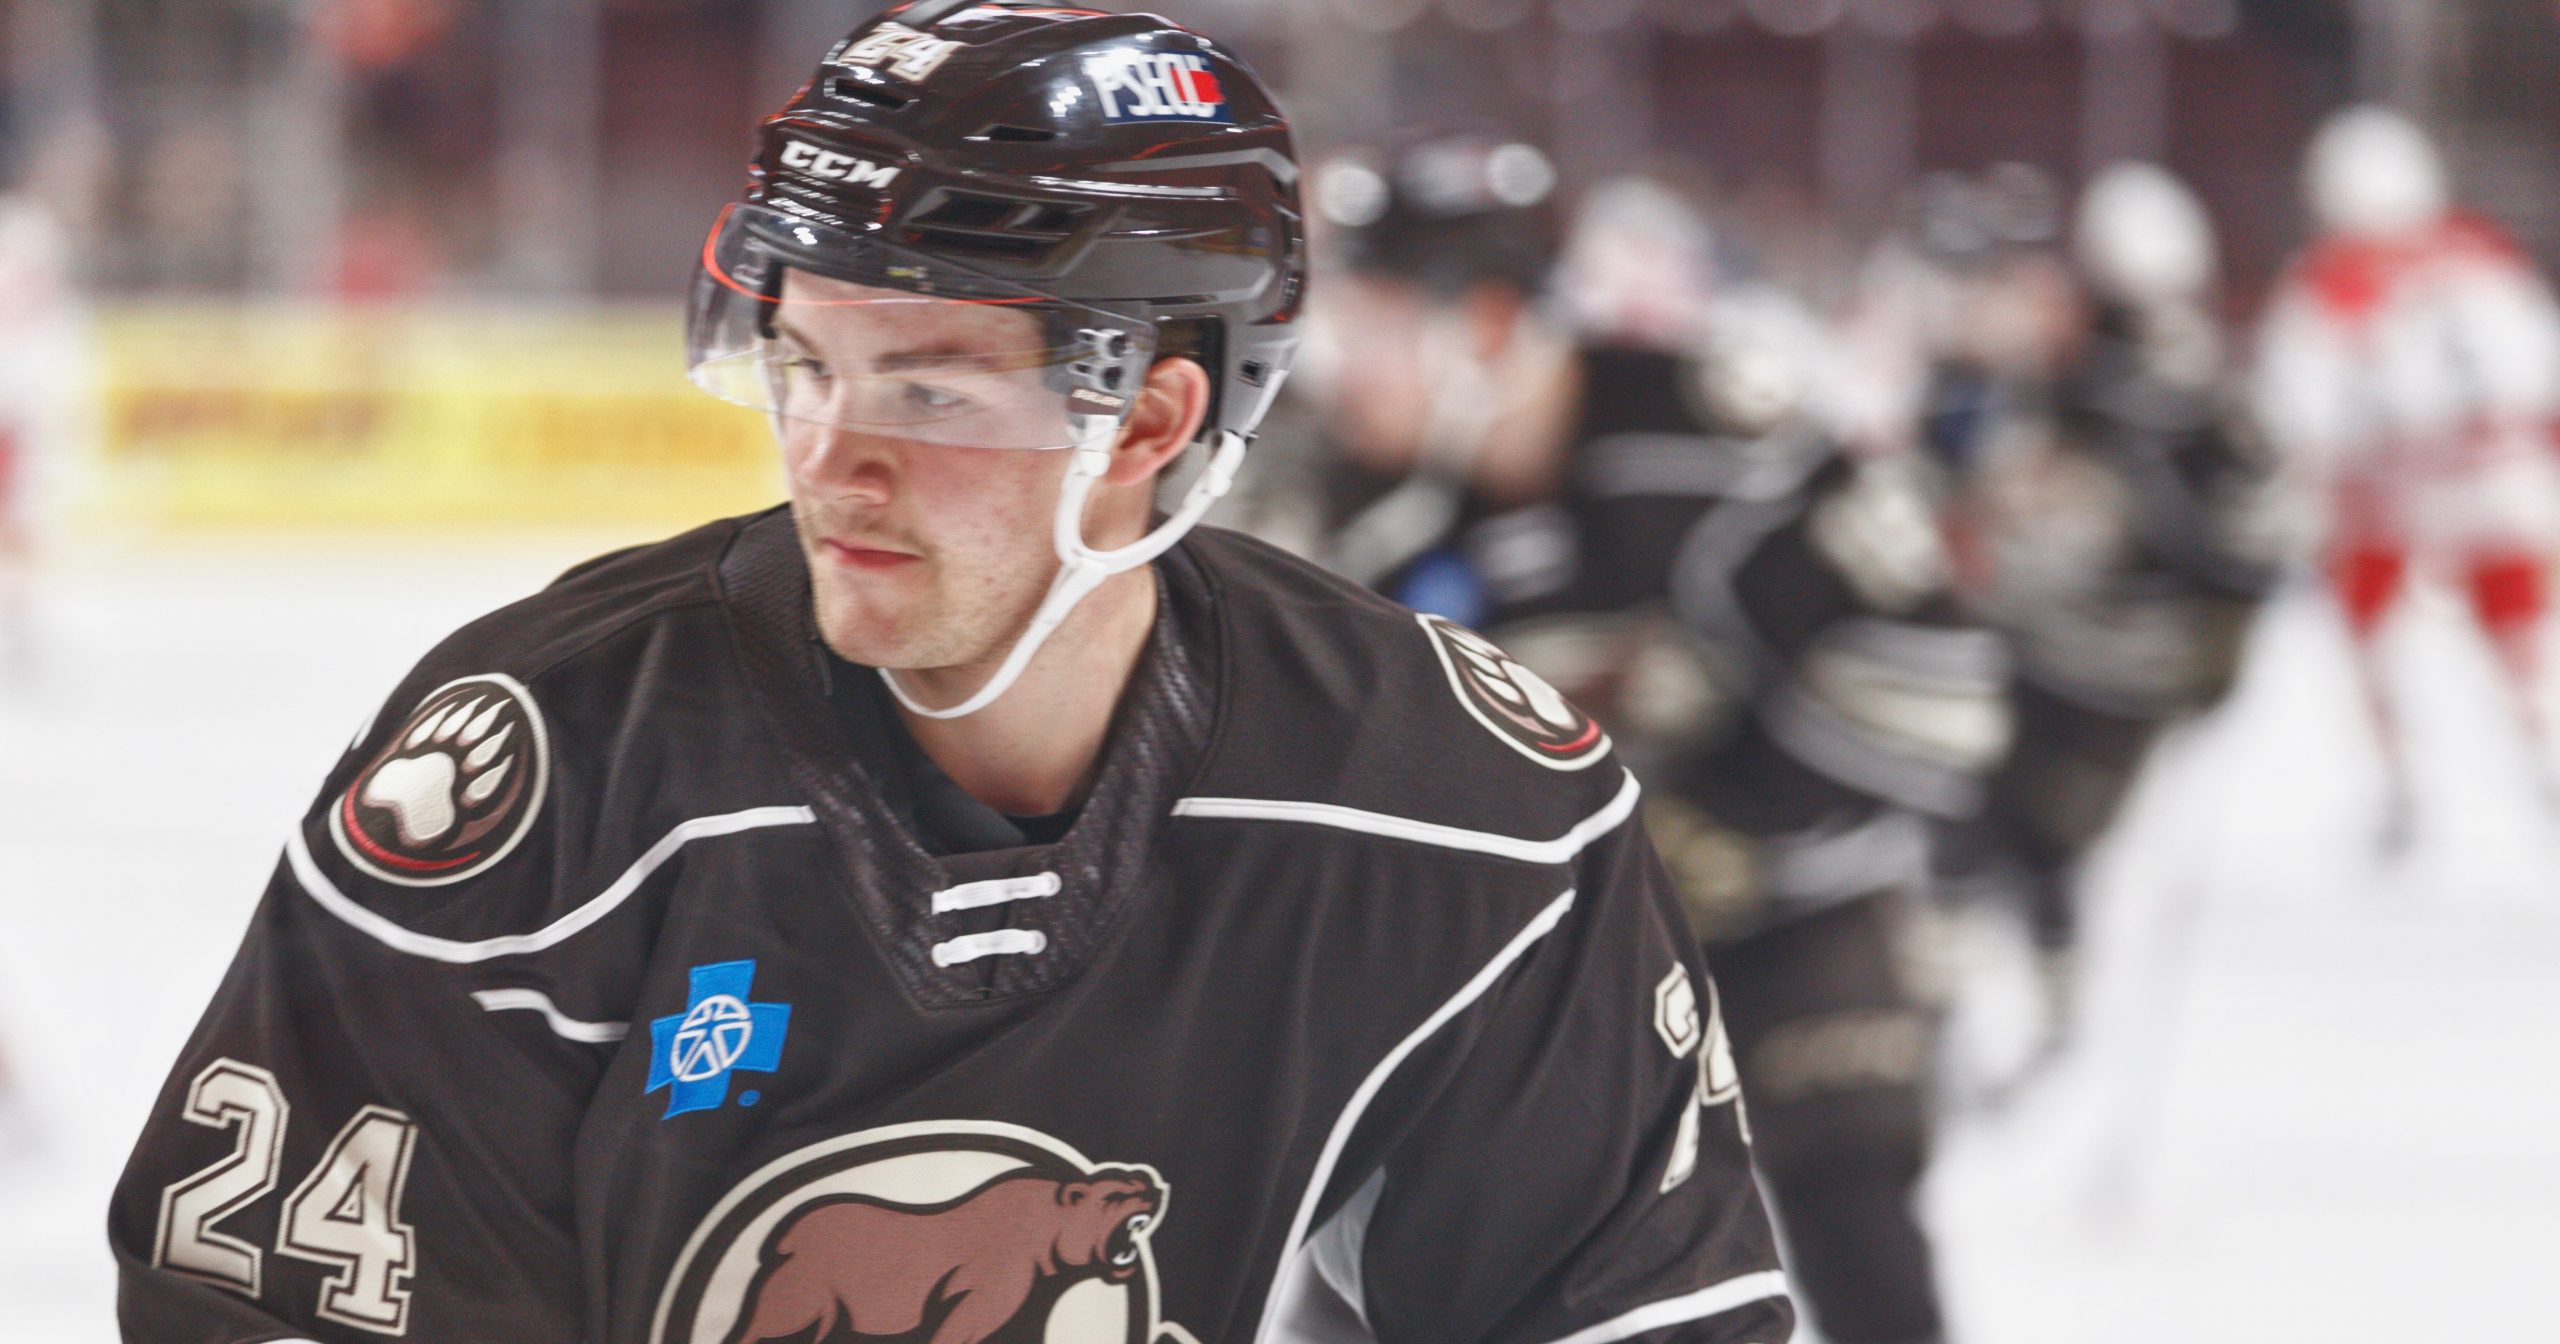 Riley Sutter Makes AHL Debut With Hershey